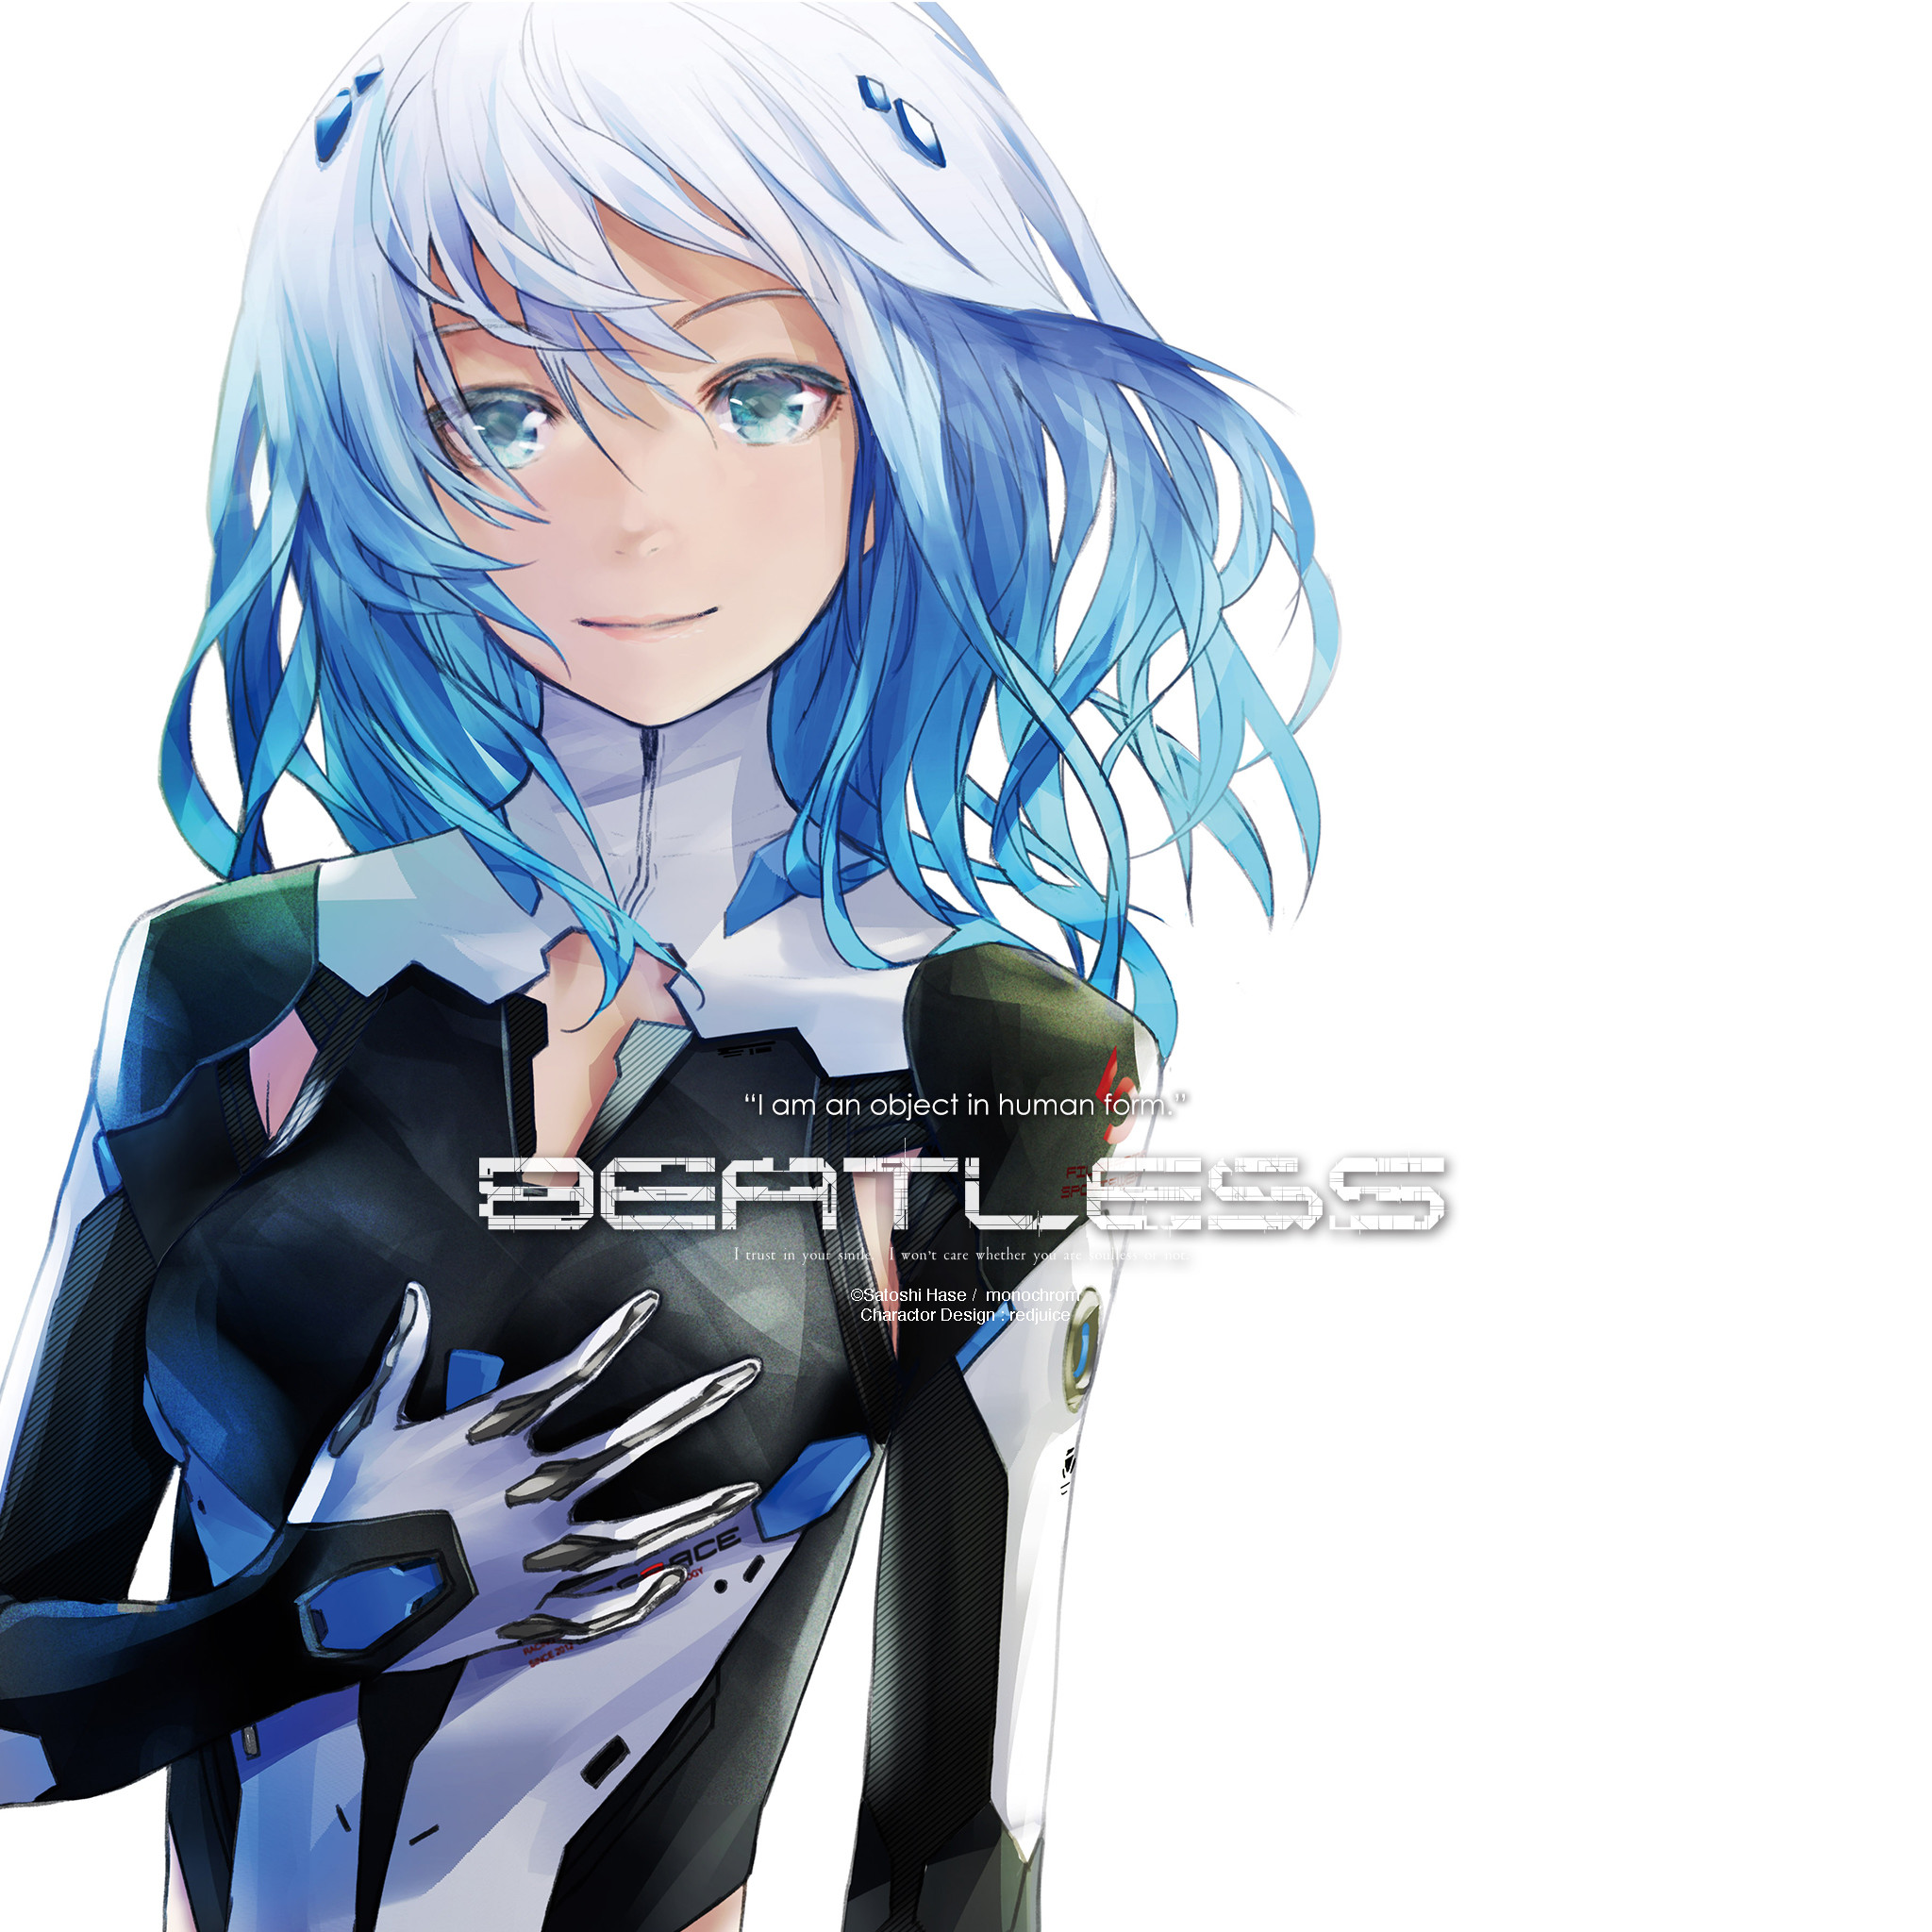 Beatless Tool For The Outsourcers Ipad タブレット壁紙ギャラリー